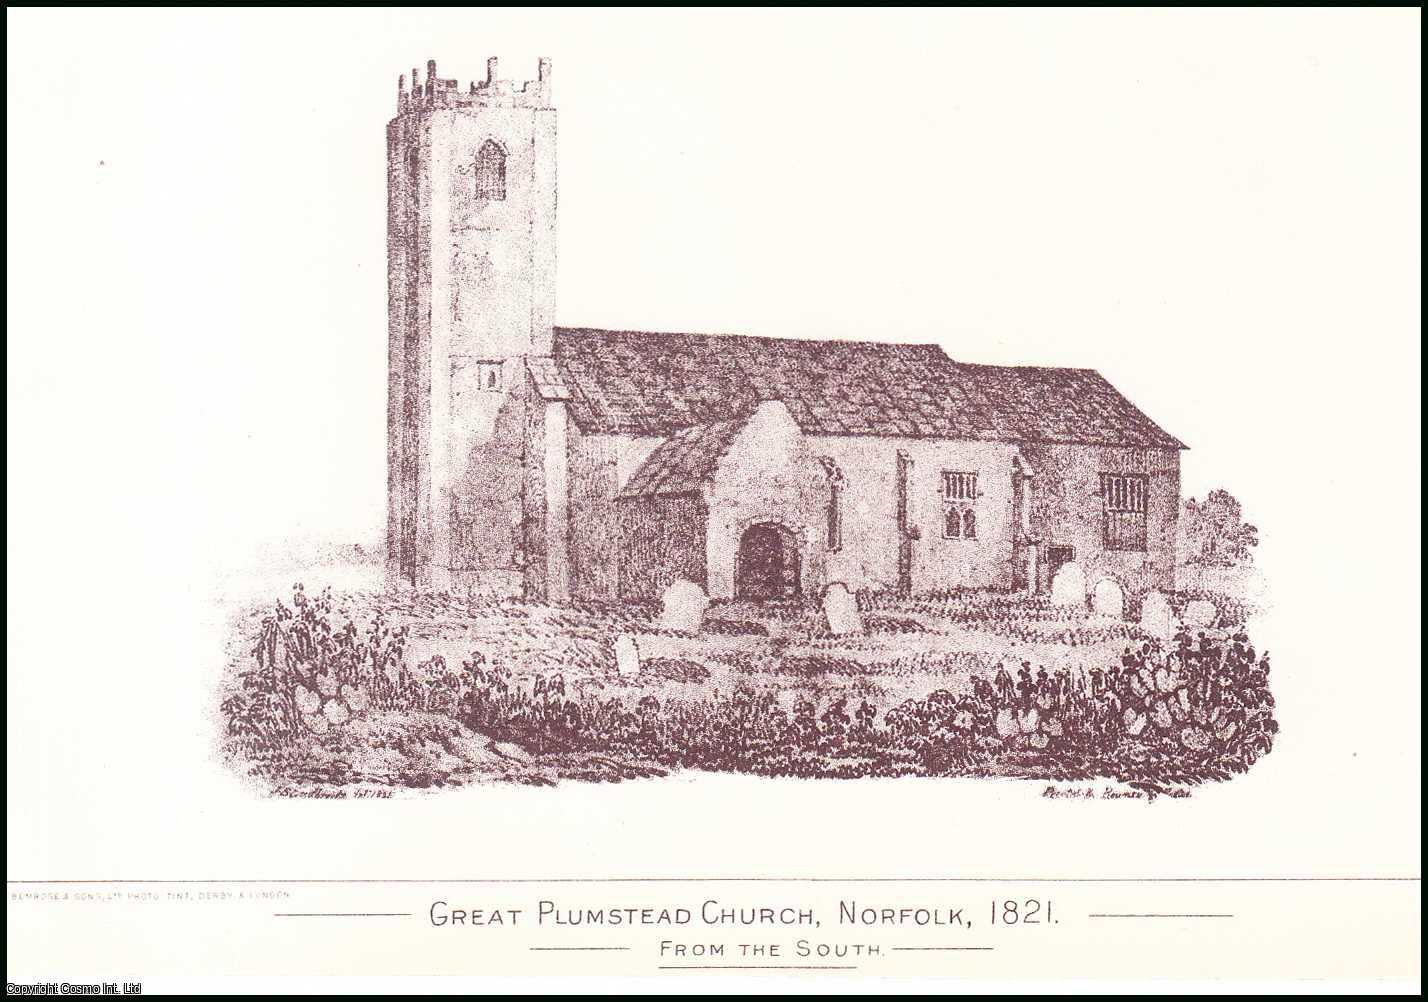 J. Lewis Andre - Great Plumstead Church, Norfolk. An original article from the Reliquary, Quarterly Journal & Review, 1892.